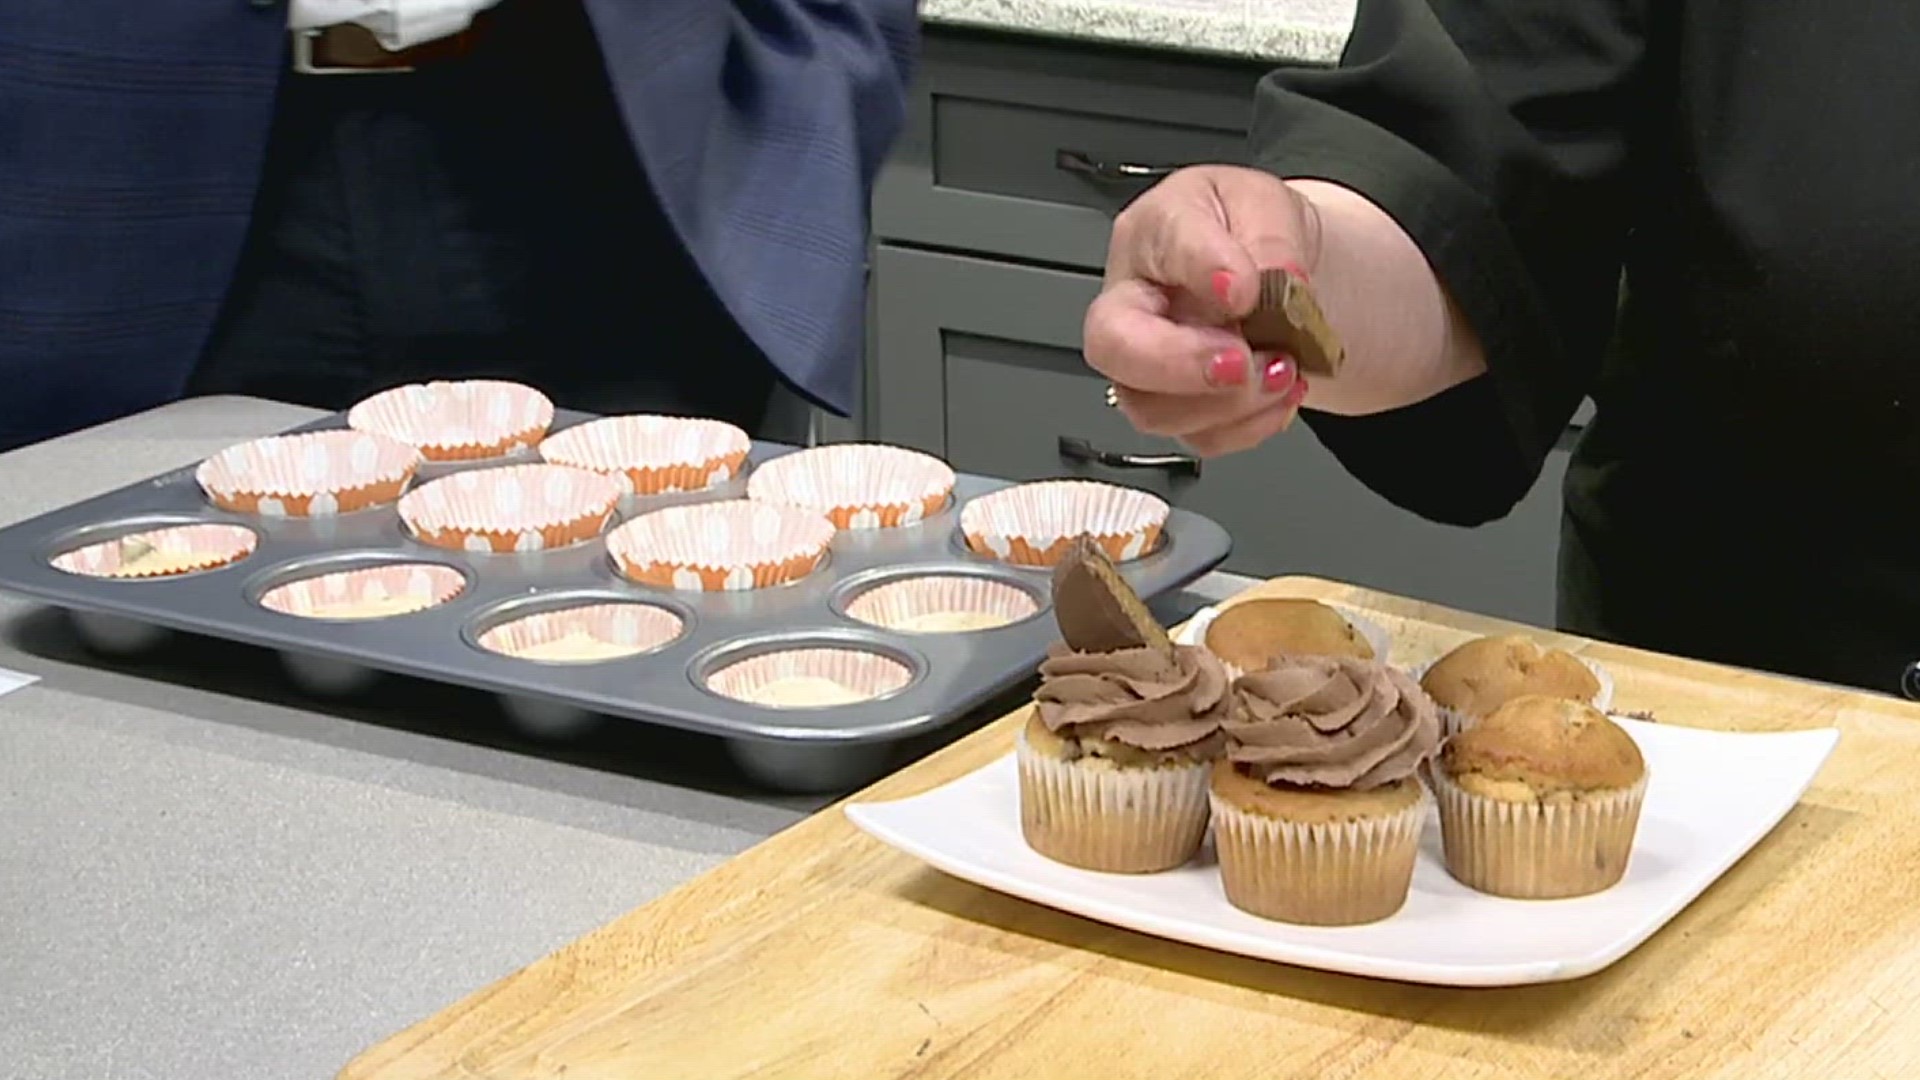 Desserts, Etc., located in Hershey, demonstrated how to make some sweet peanut butter treats in honor of 'I Love Reese's Day.'